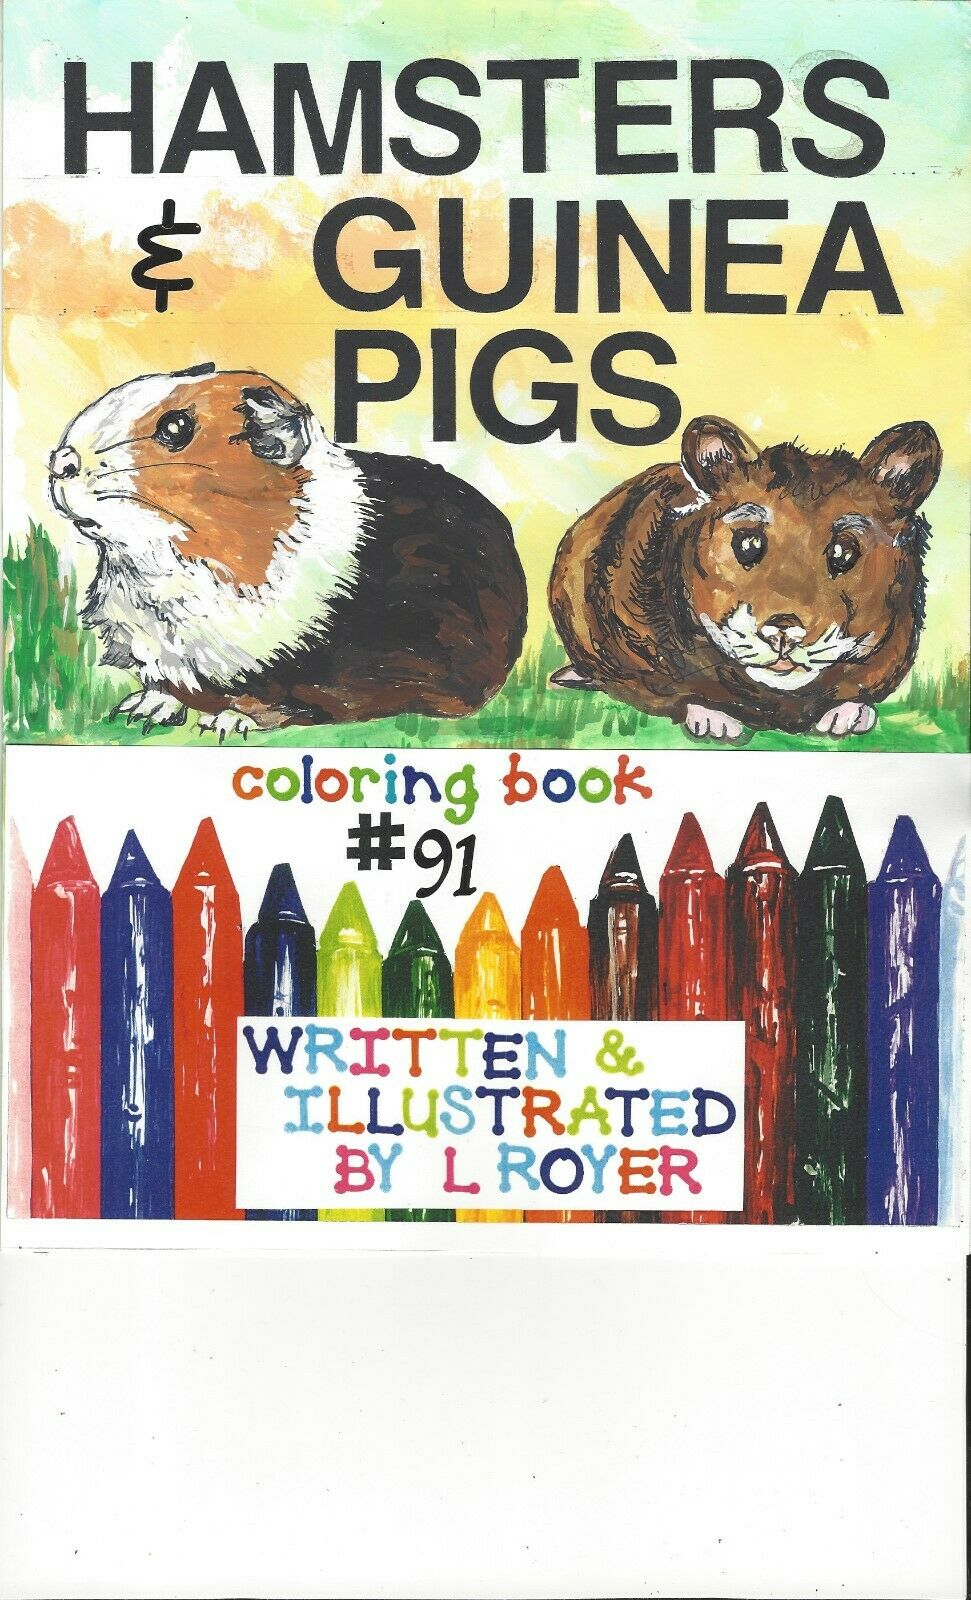 HAMSTERS & GUINEA PIGS COLORING BOOK #91 BY L ROYER 81/2